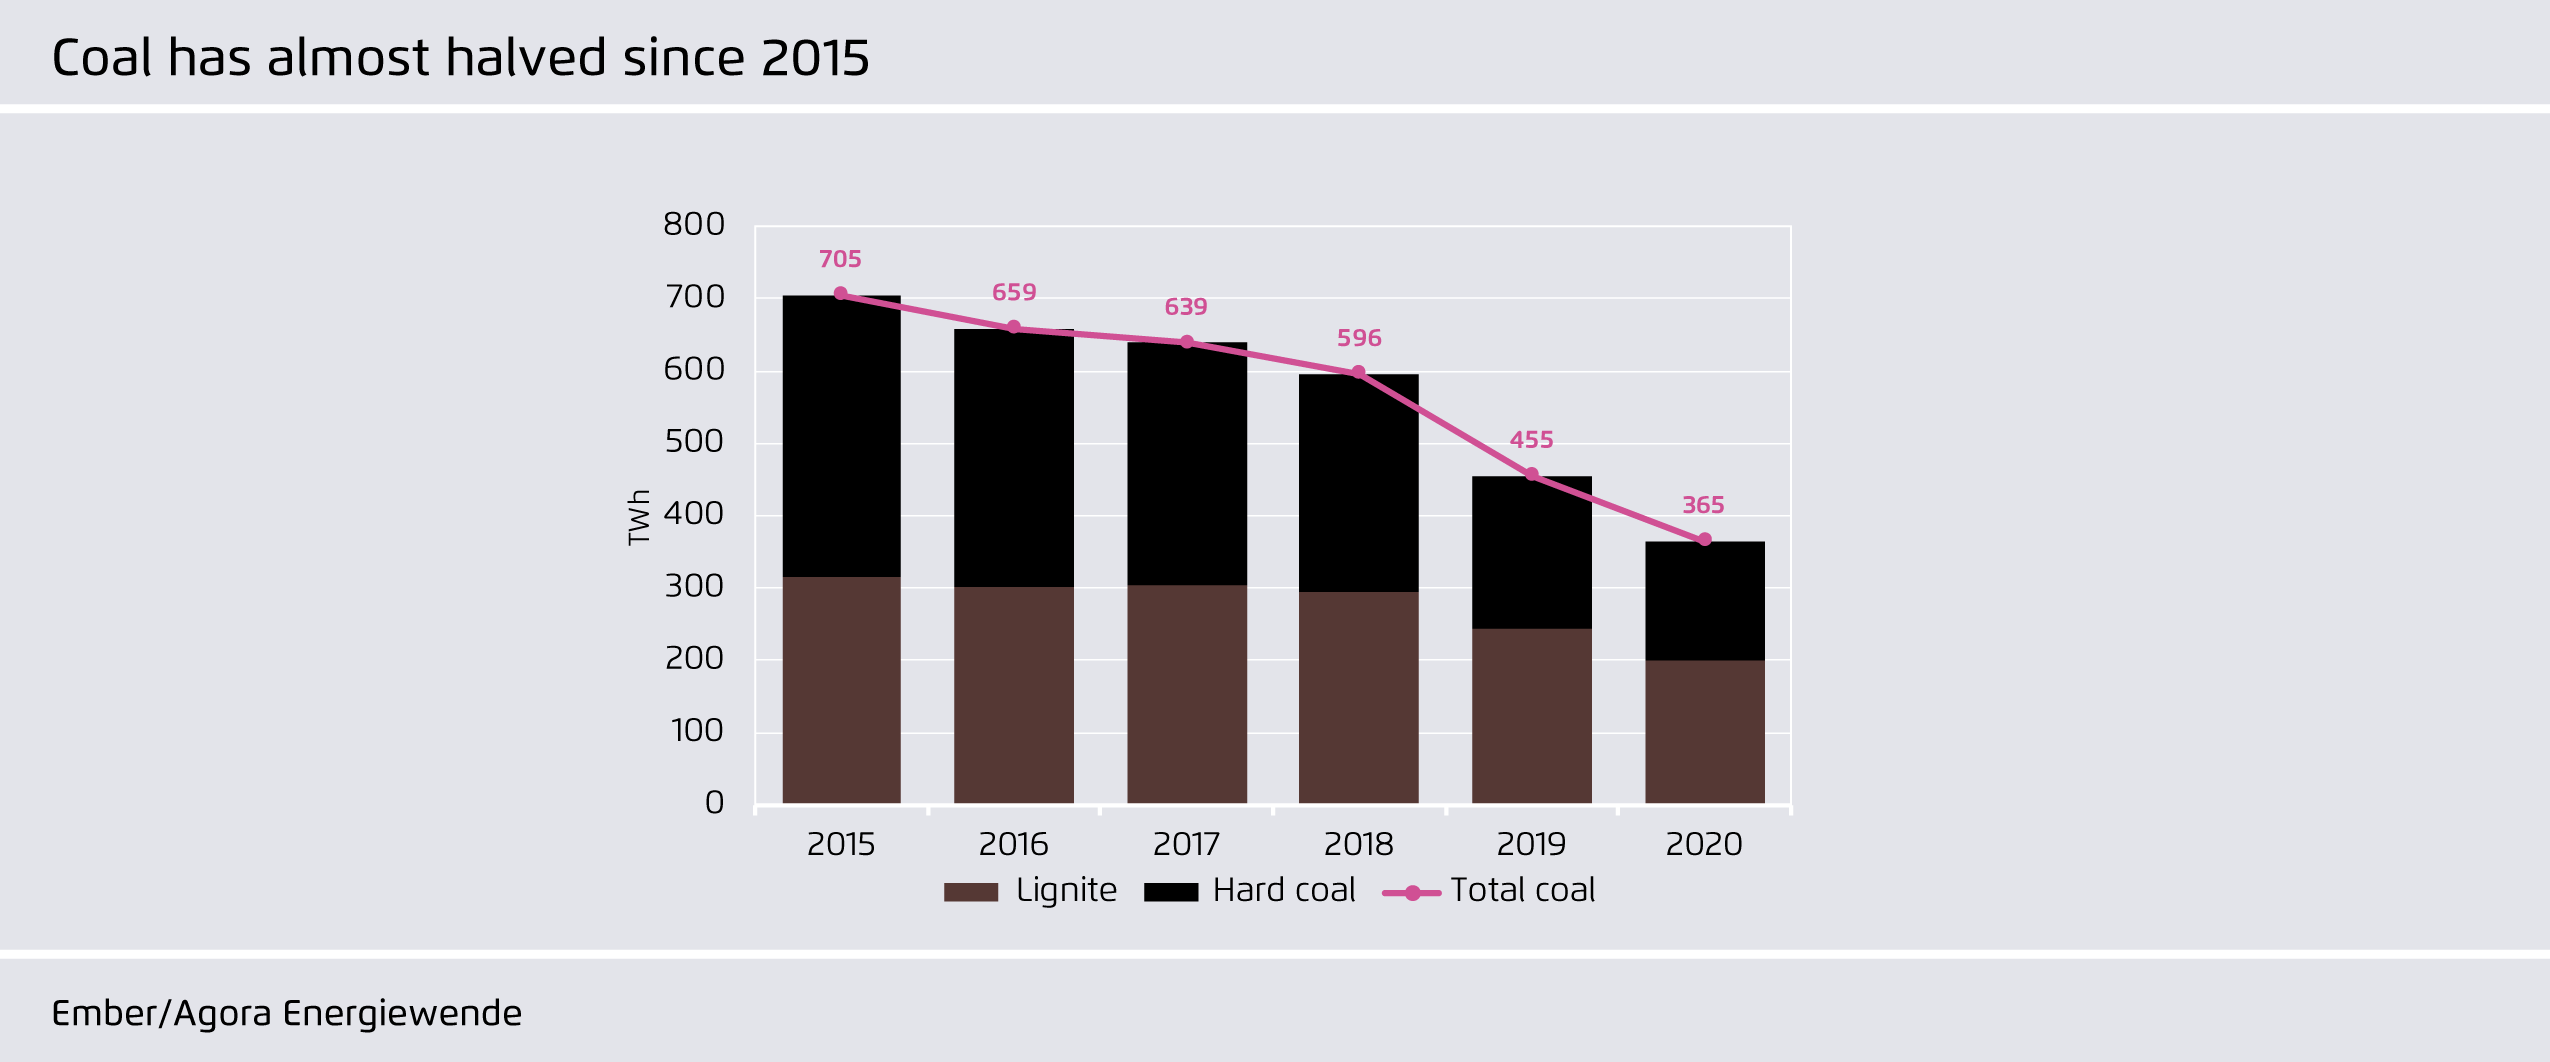 Preview for Coal has almost halved since 2015